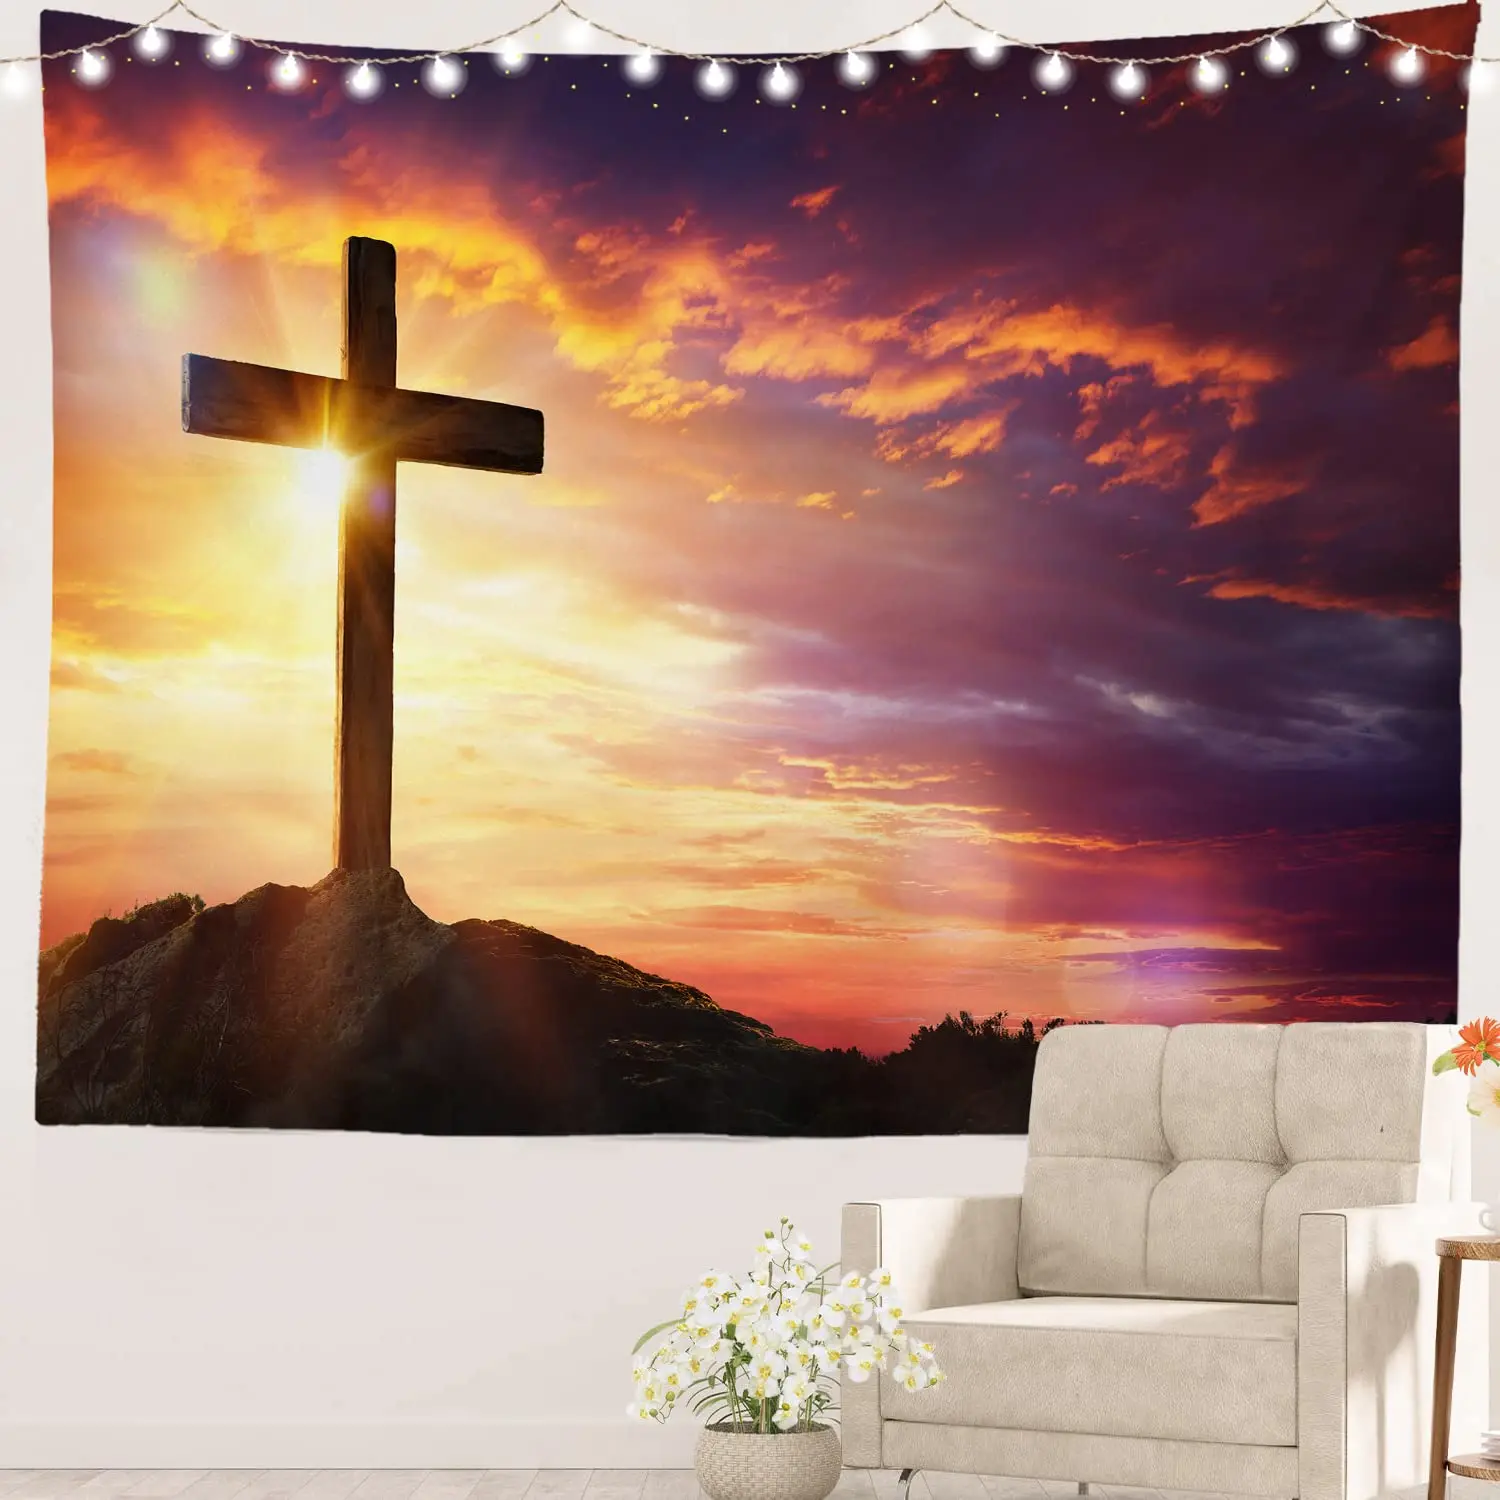 

Tapestry Christ on The Cross Tapestry Wall Art Christian Faith Decoration Gifts for Bedroom Living Room Dormitory Sunset Cross